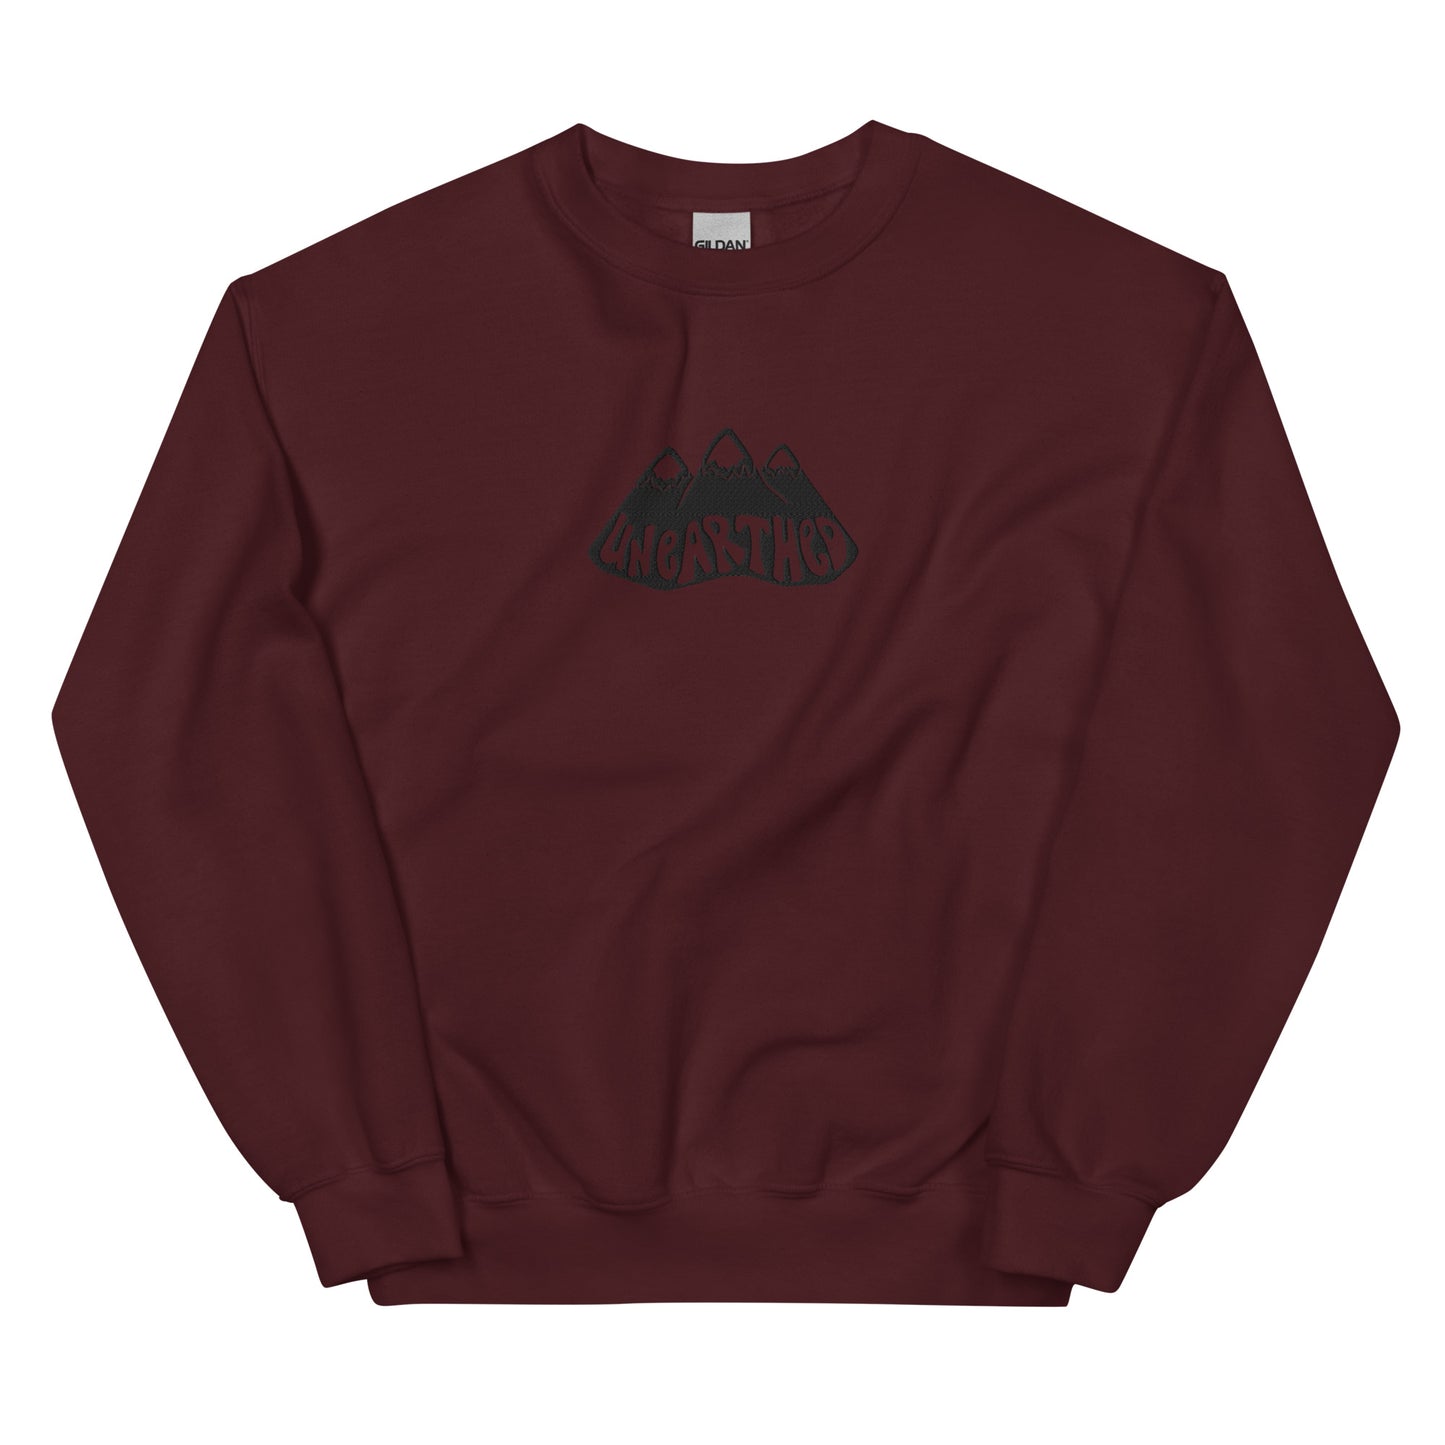 unearthed mountains sweatshirt